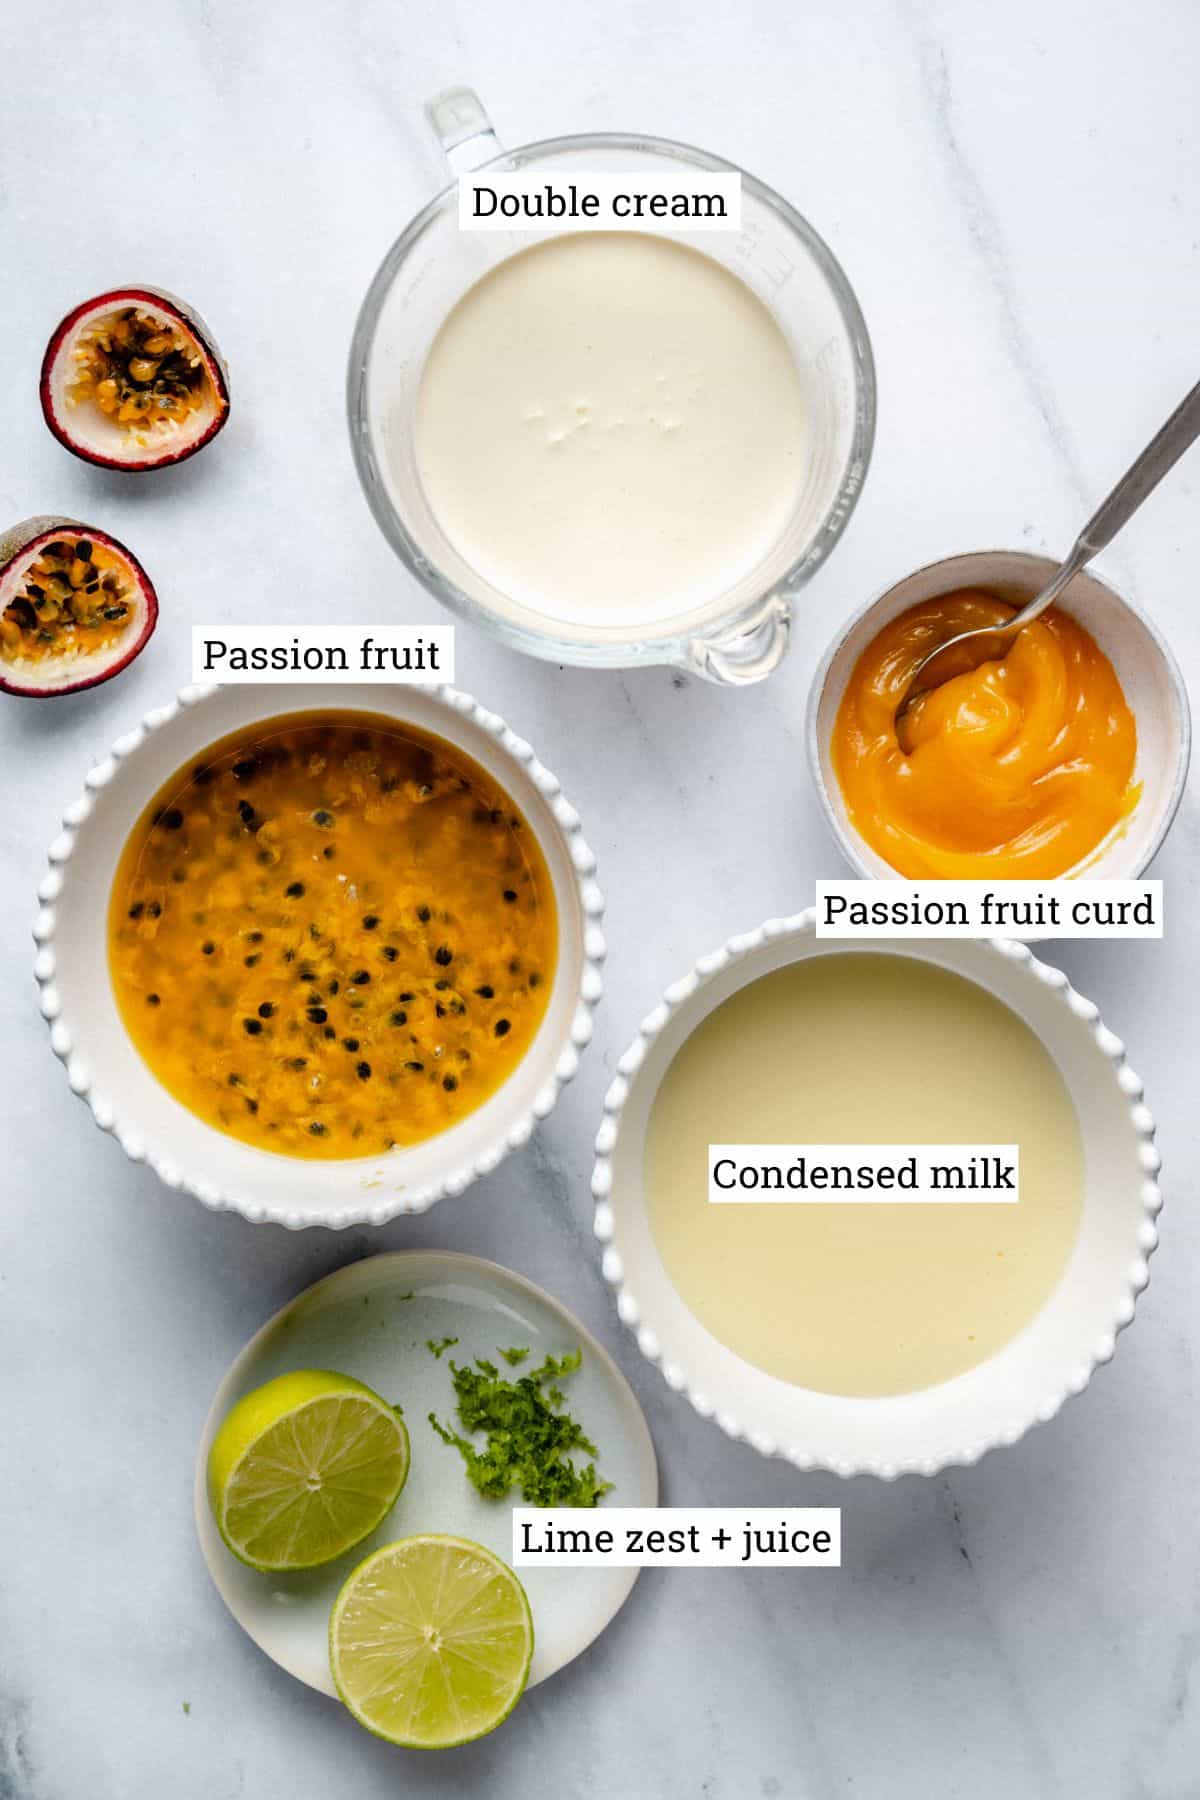 Ingredients for ice cream in various bowls on a marble background.